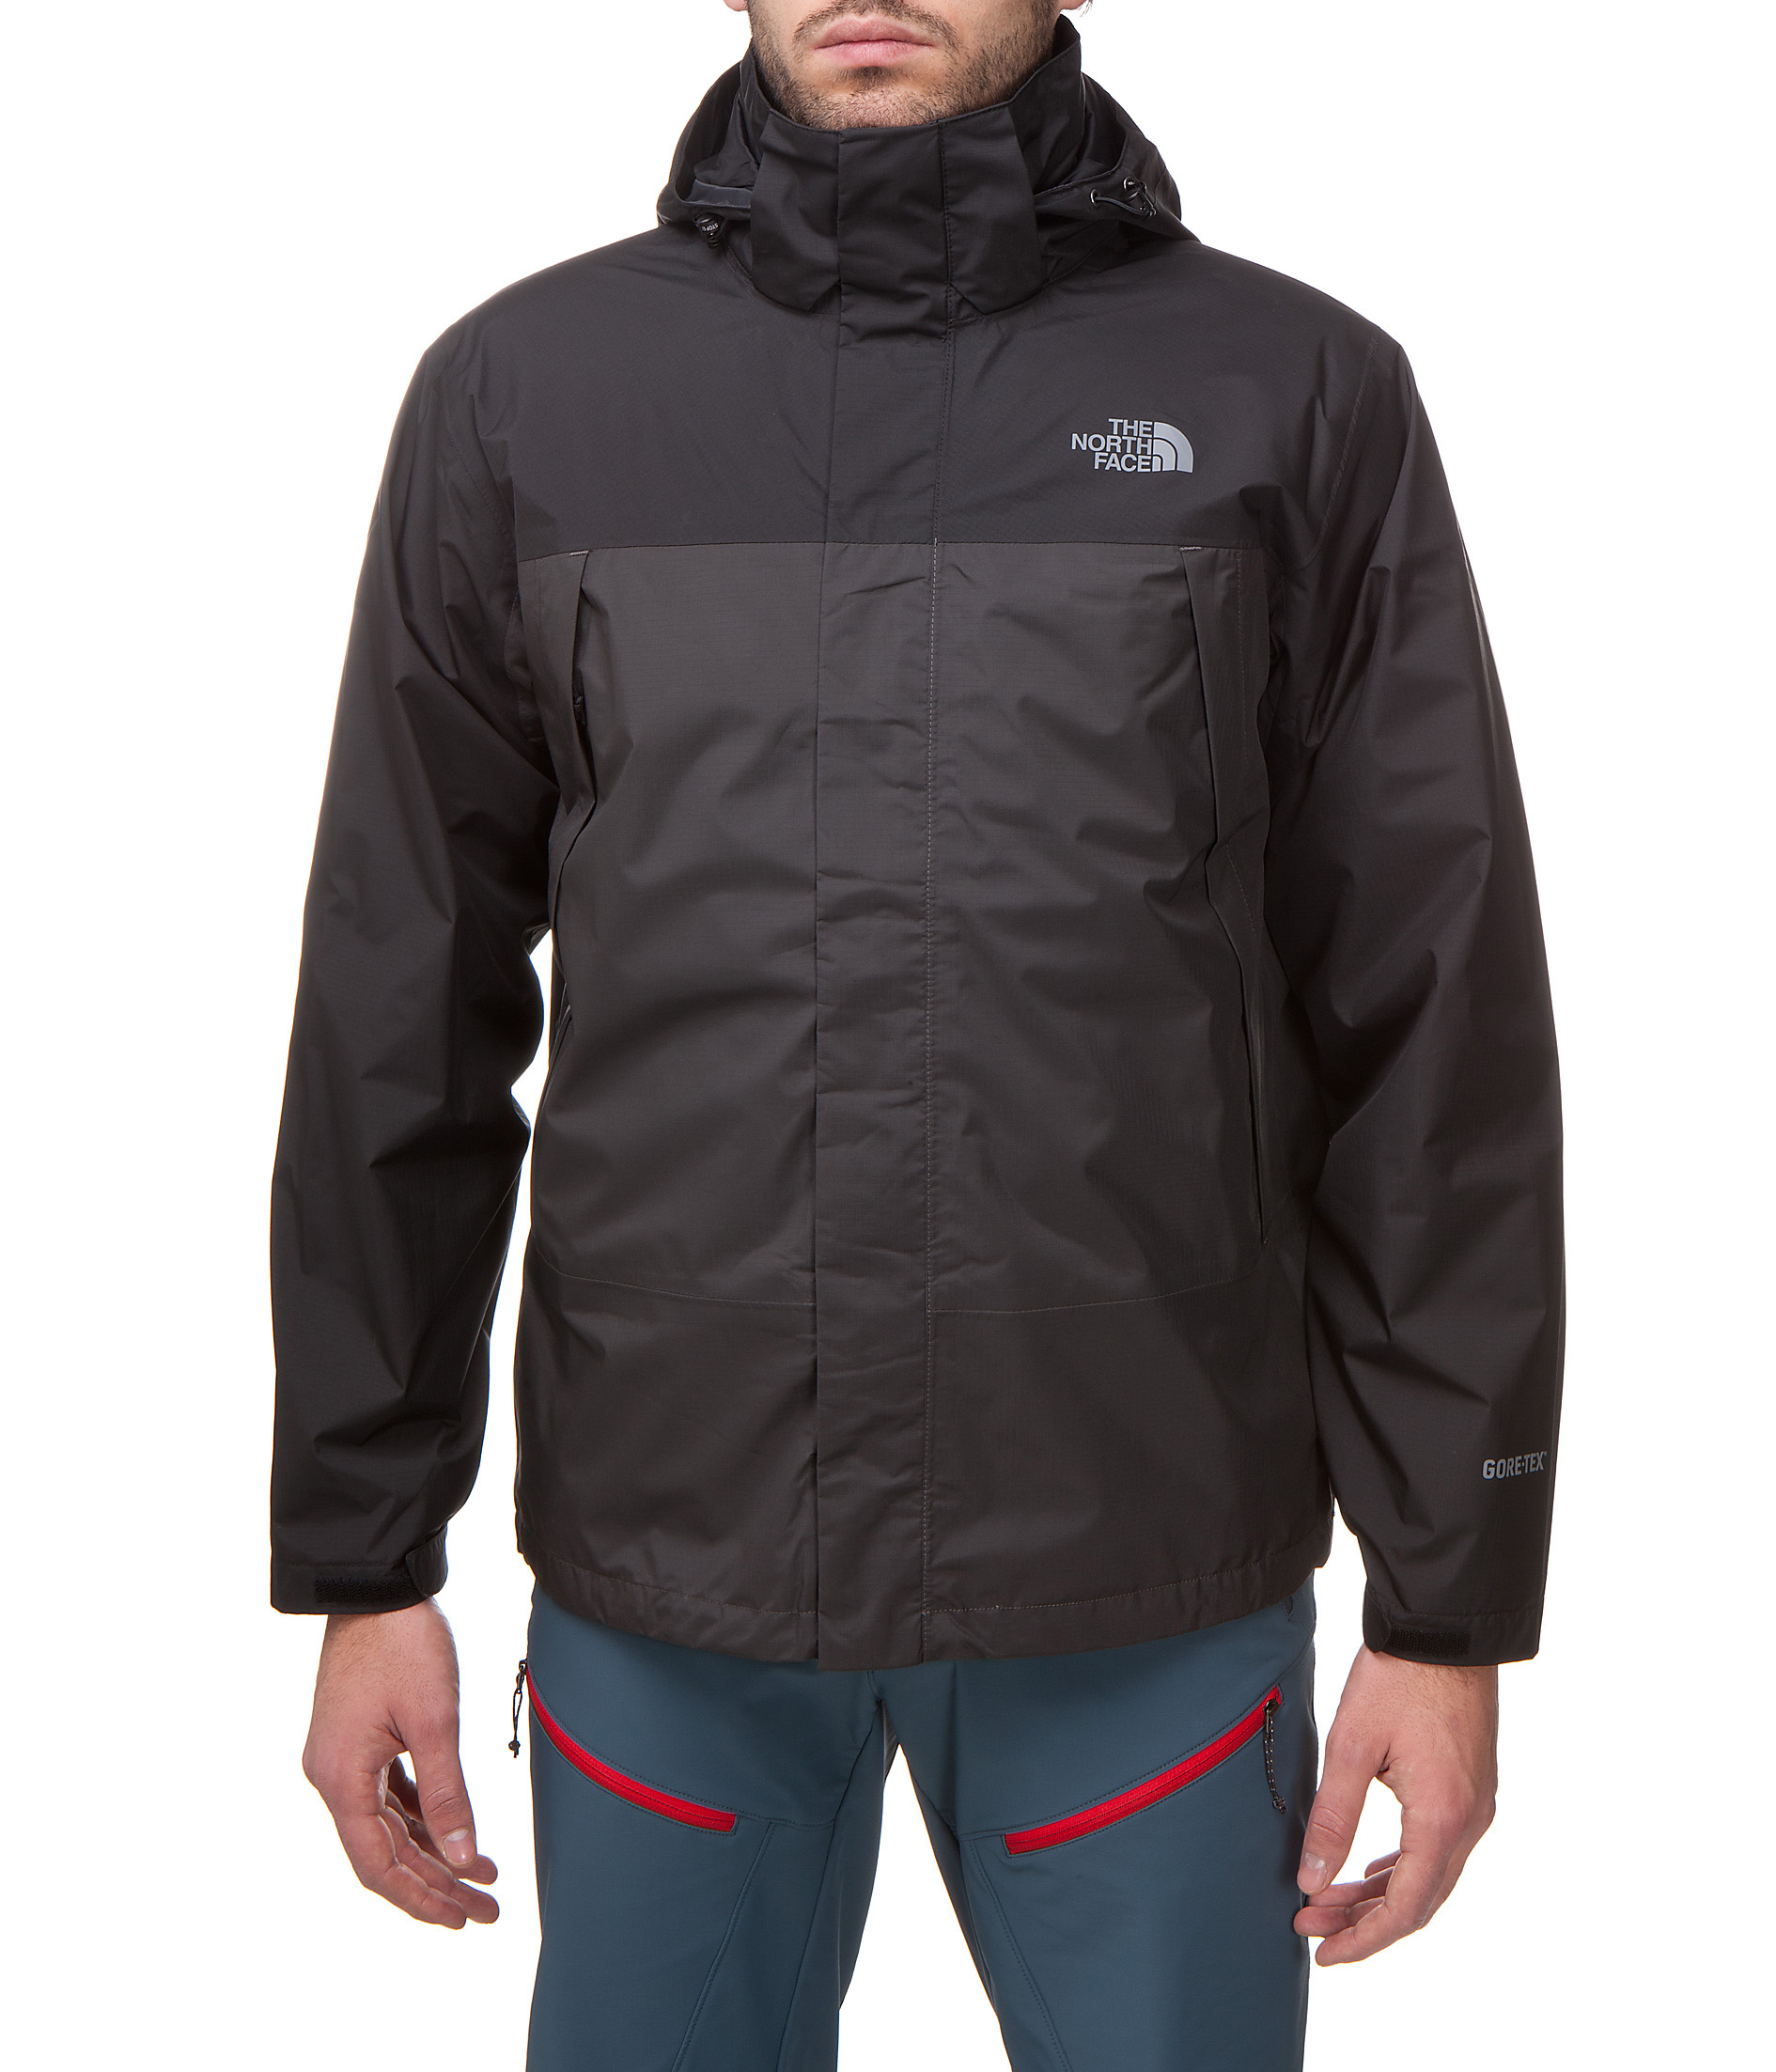 Foto The North Face Men's Mountain Light Triclimate™ Jacket foto 200288